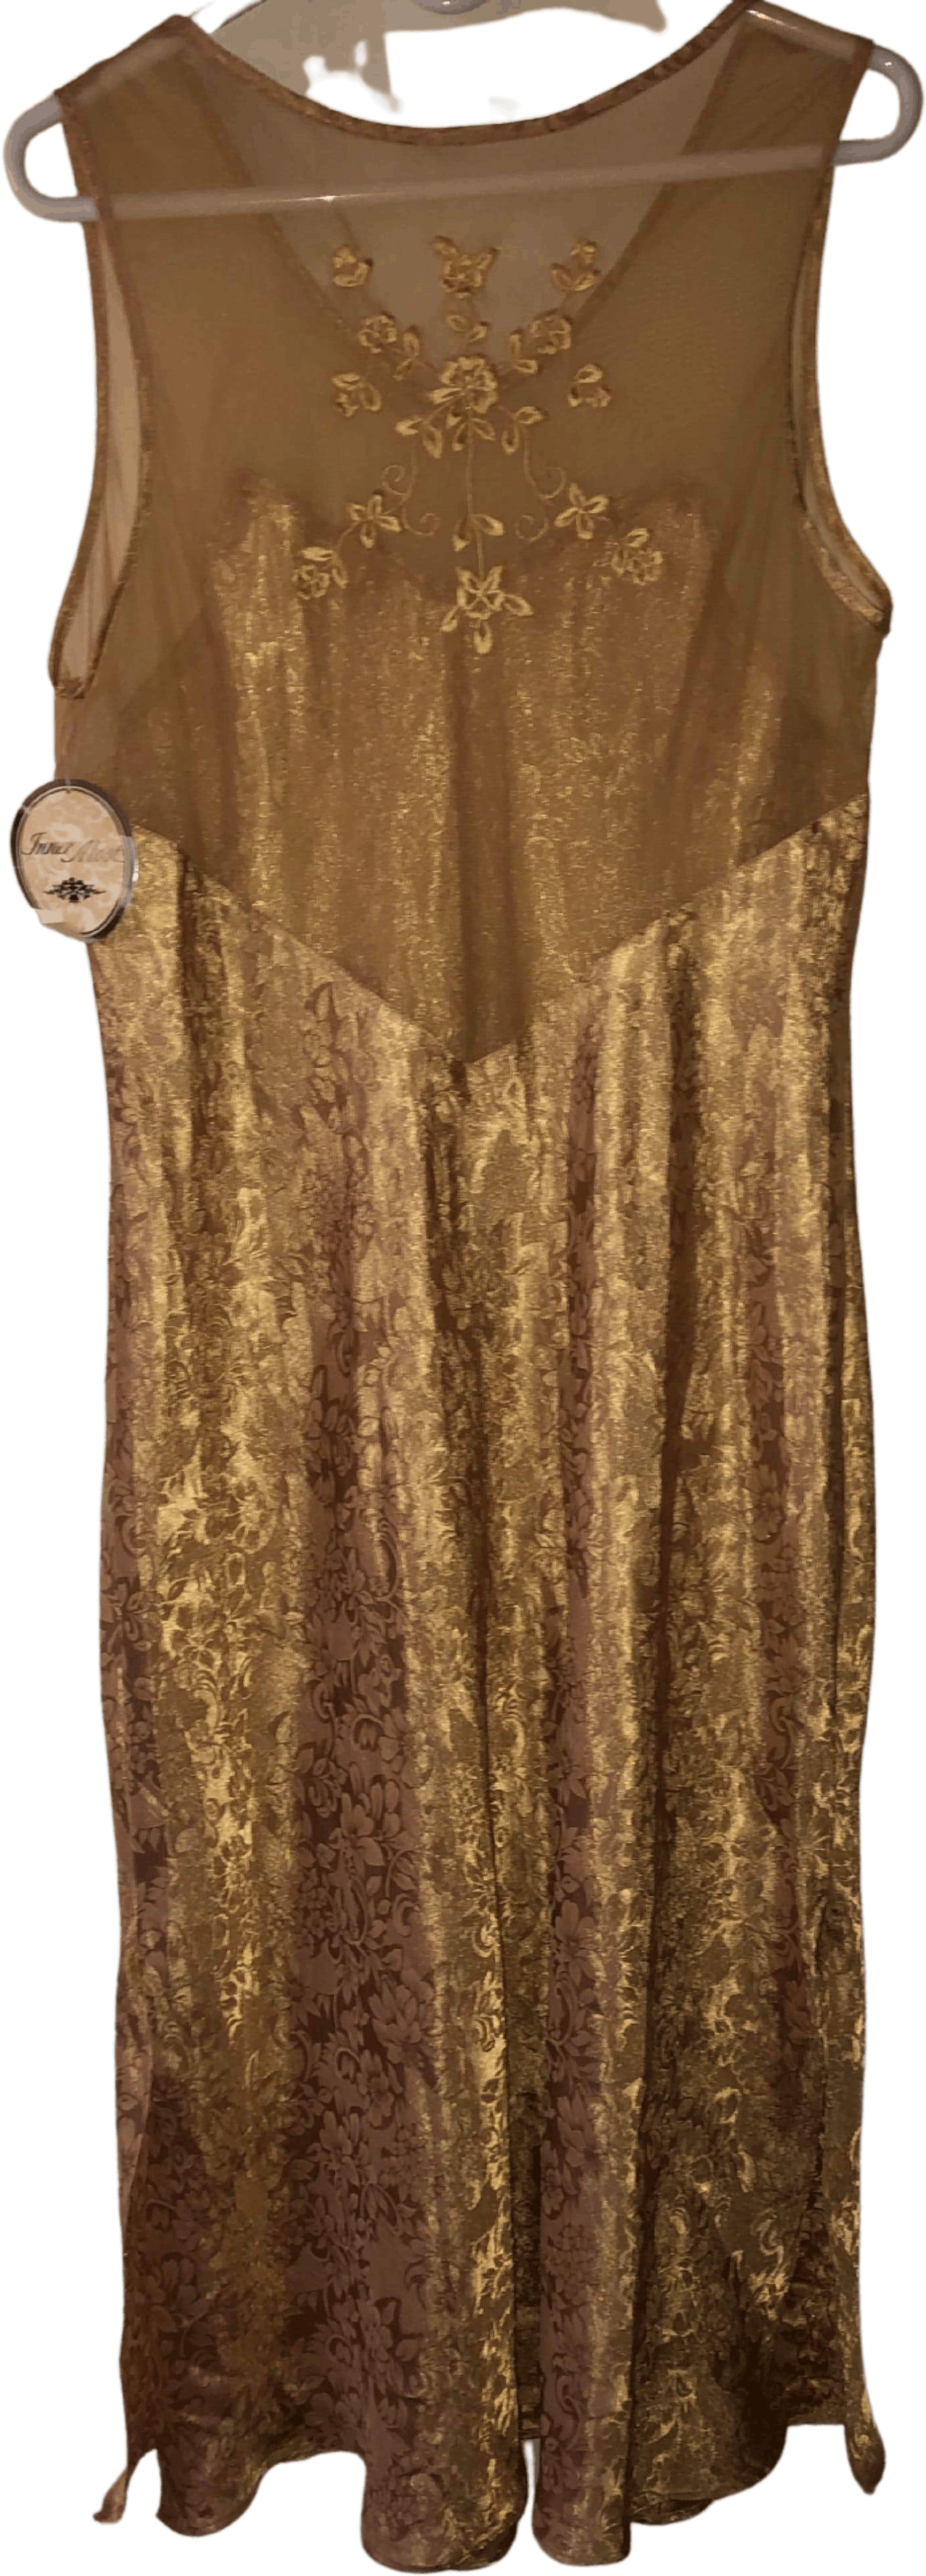 Vintage 80's Deadstock Gold Satin Nightgown by Inner Most | Shop THRILLING